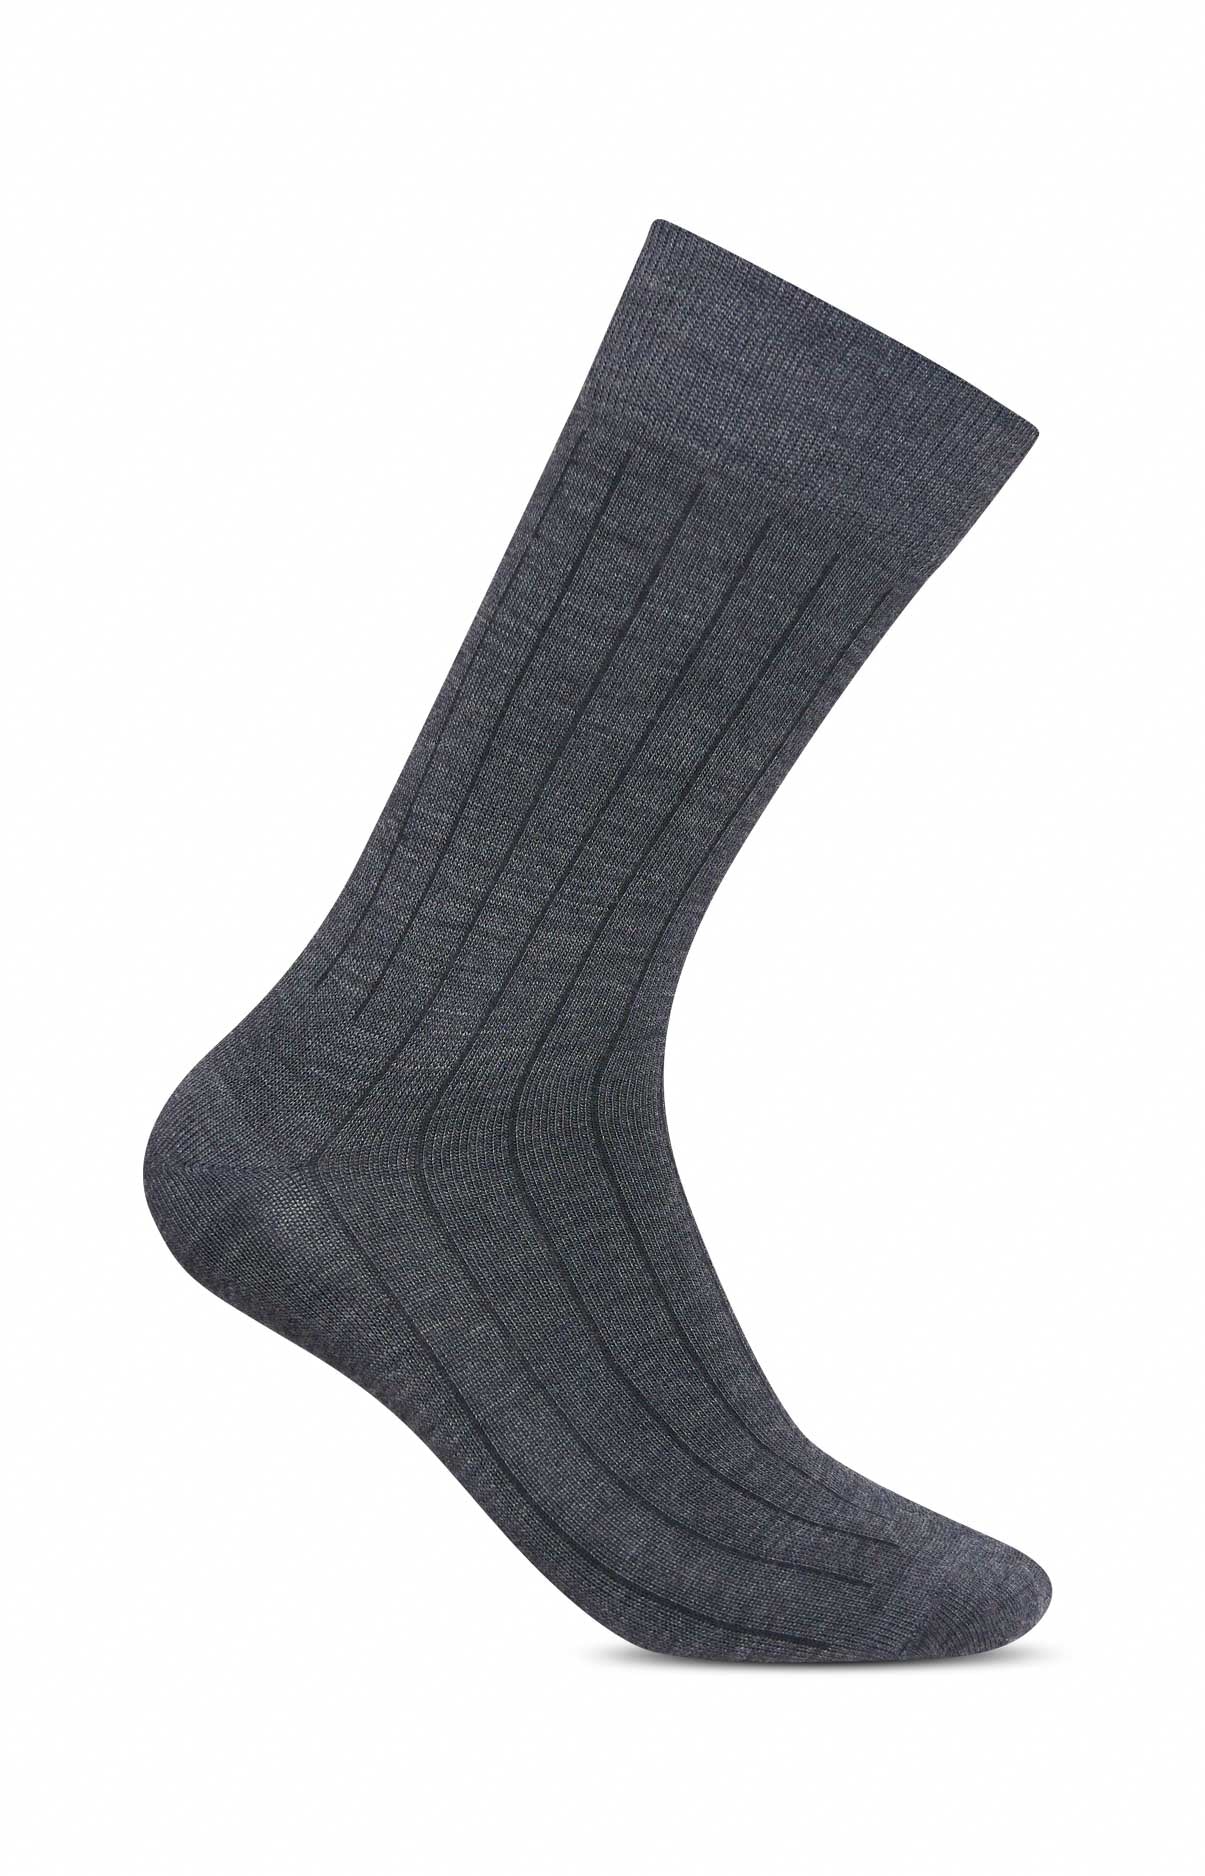 Wool and cashmere socks - Anthracite